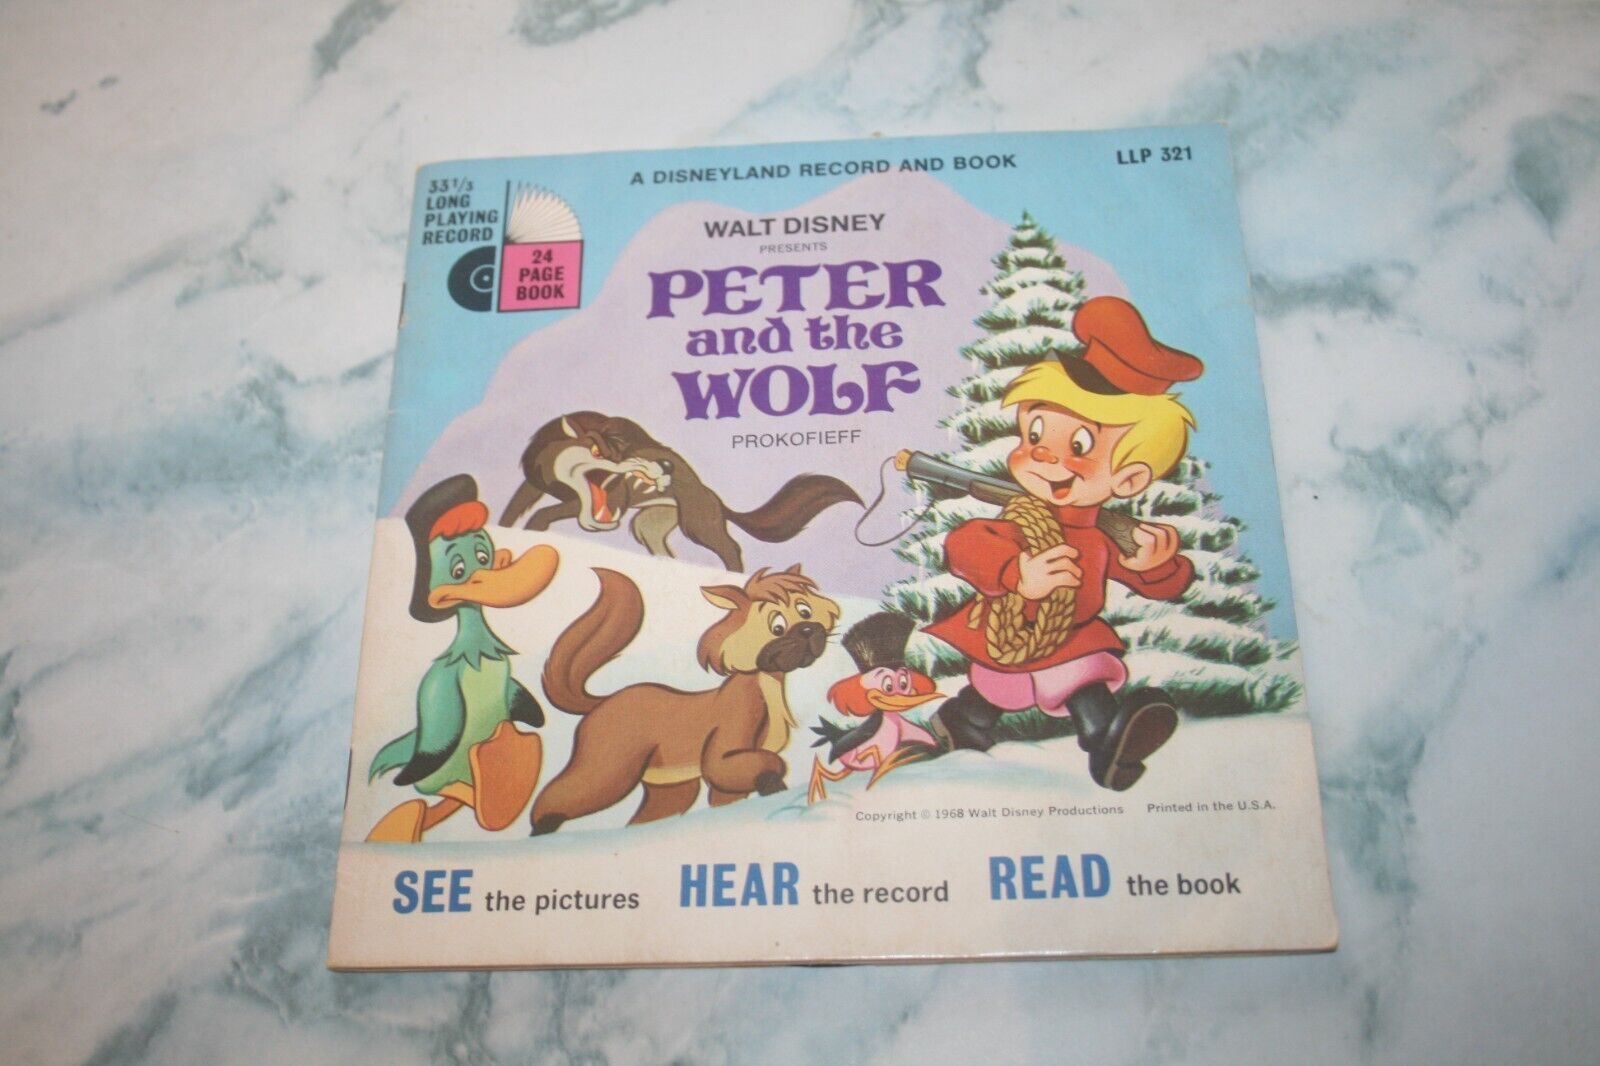 Vintage 1968 Walt Disney Book with Record Story of Peter and the Wolf